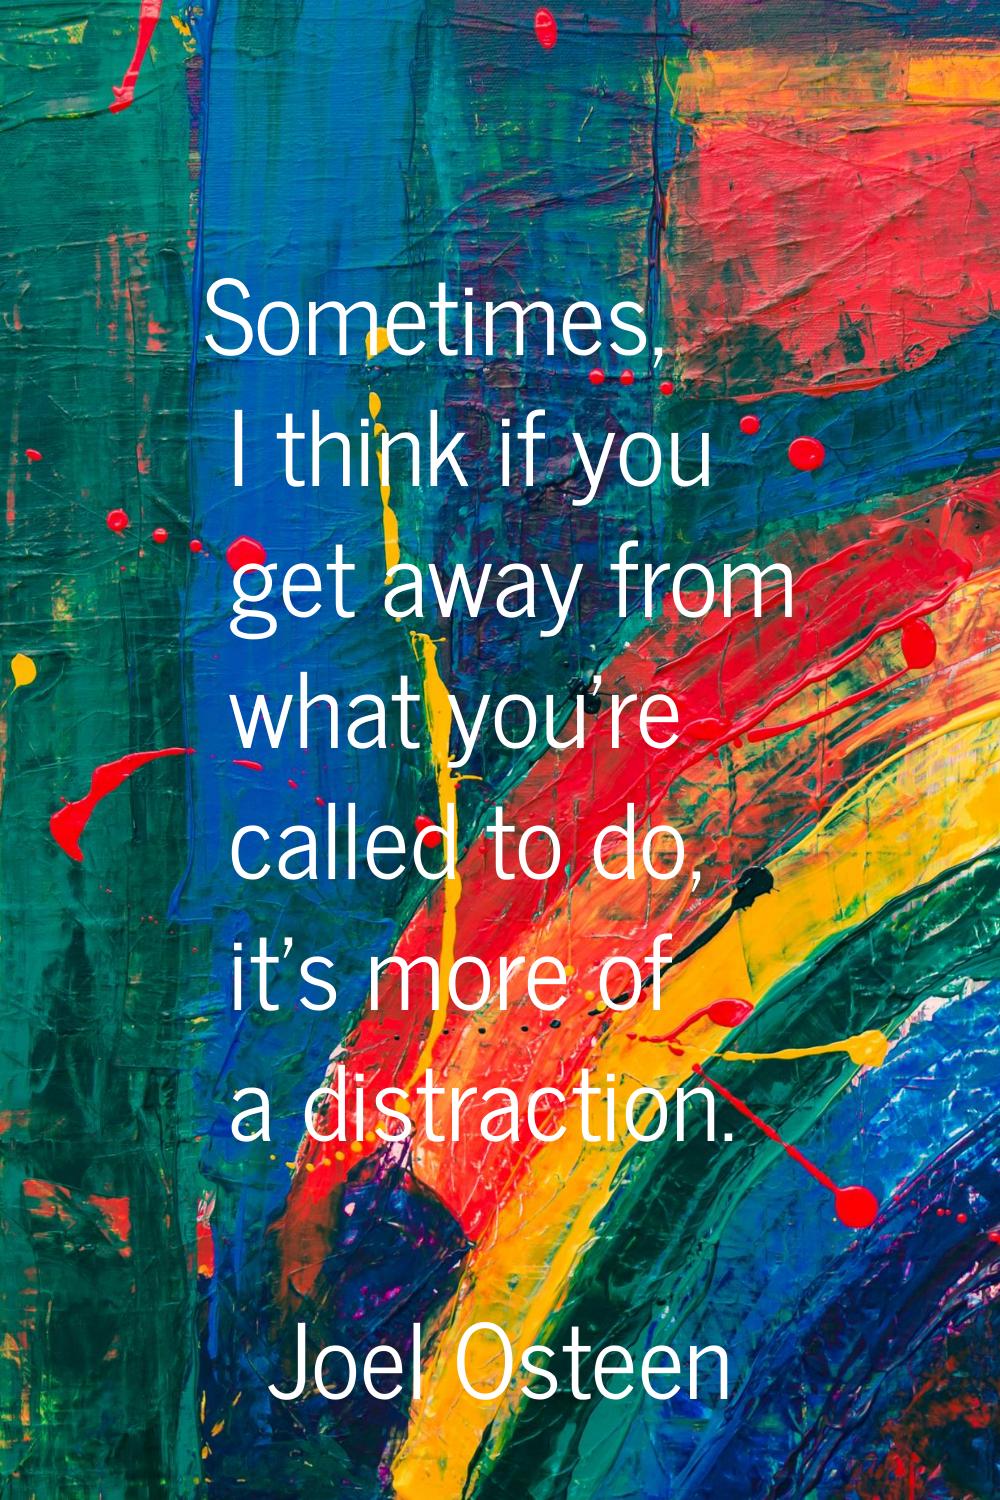 Sometimes, I think if you get away from what you're called to do, it's more of a distraction.